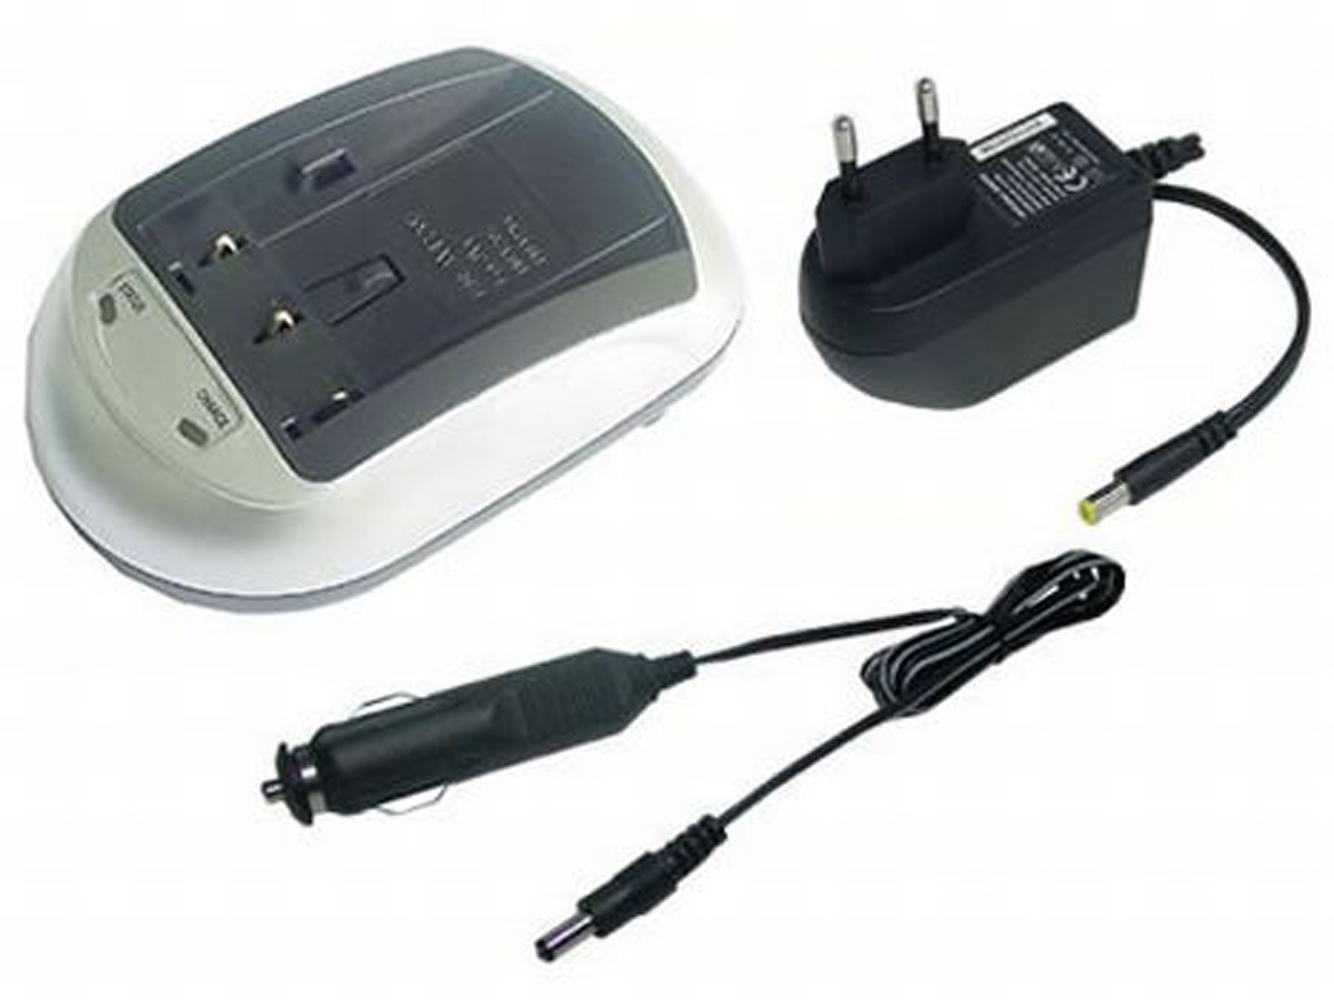 Casio Bn-v207, Bn-v207u Battery Chargers For Casio Exilim Zoom Ex-z12, Casio Exilim Zoom Ex-z15 replacement